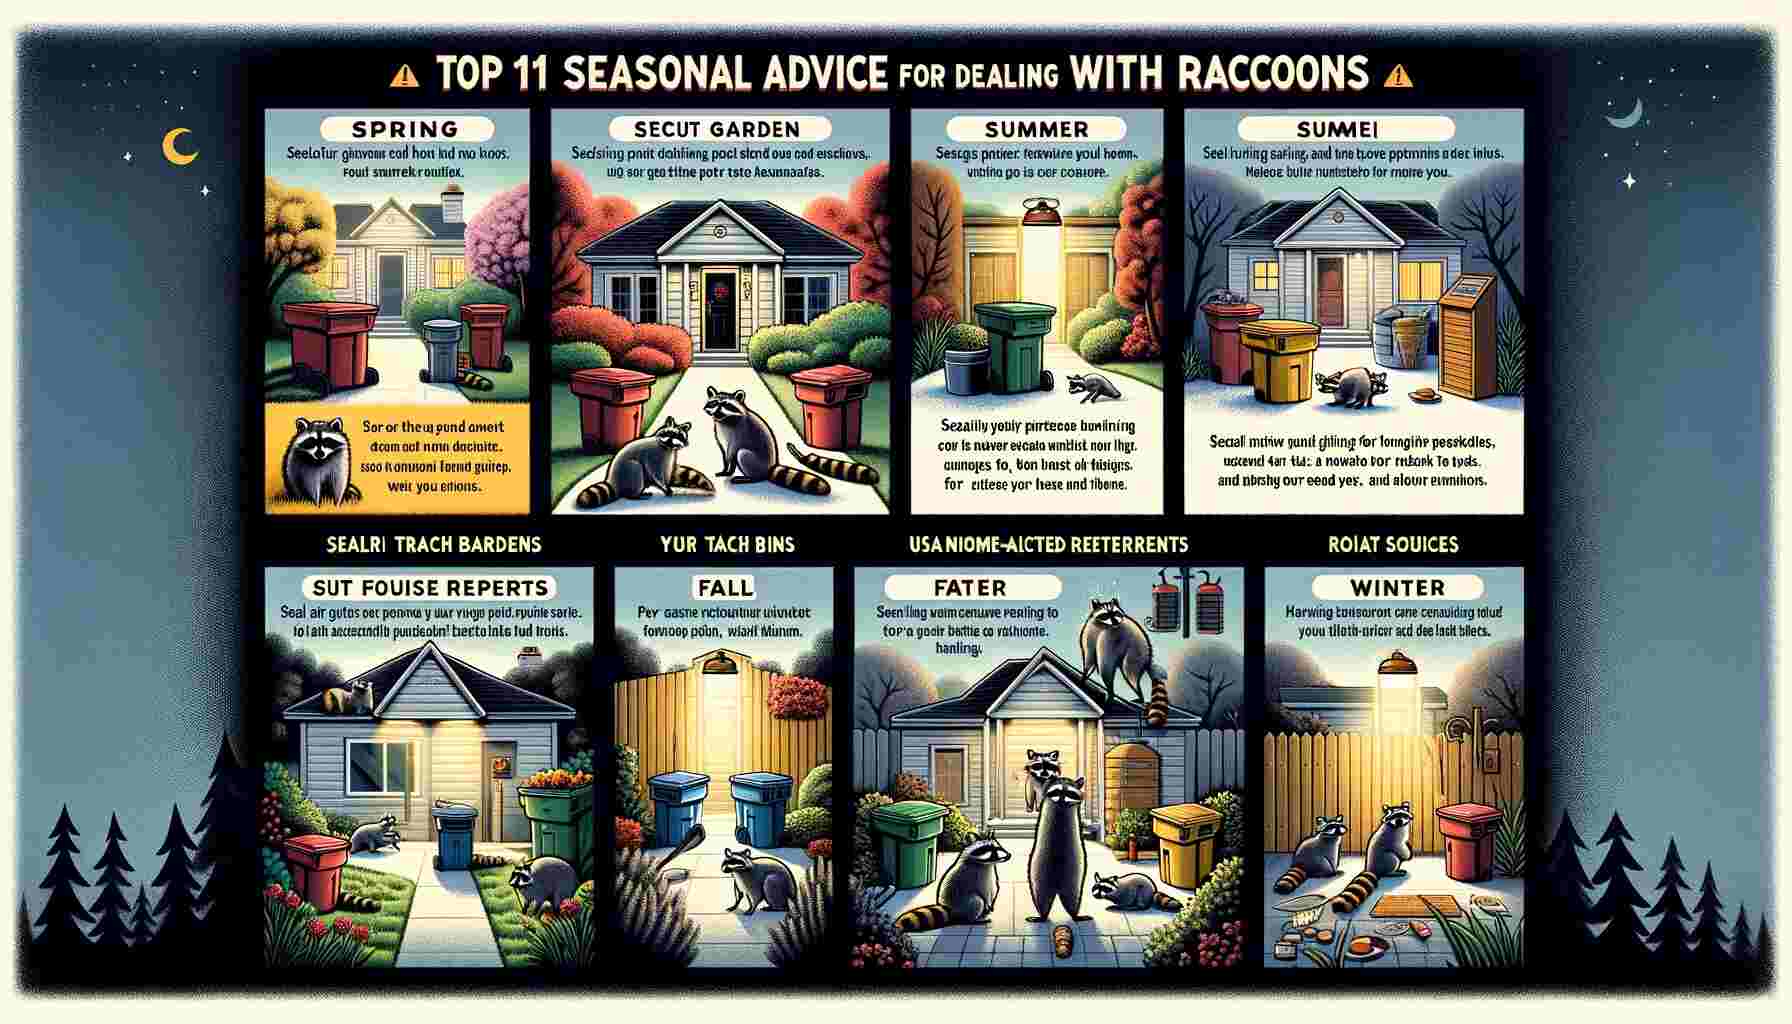 The image presents the 'Top 11 Seasonal Advice for Dealing with Raccoons,' featuring a series of vignettes for each season with specific tips and strategies.